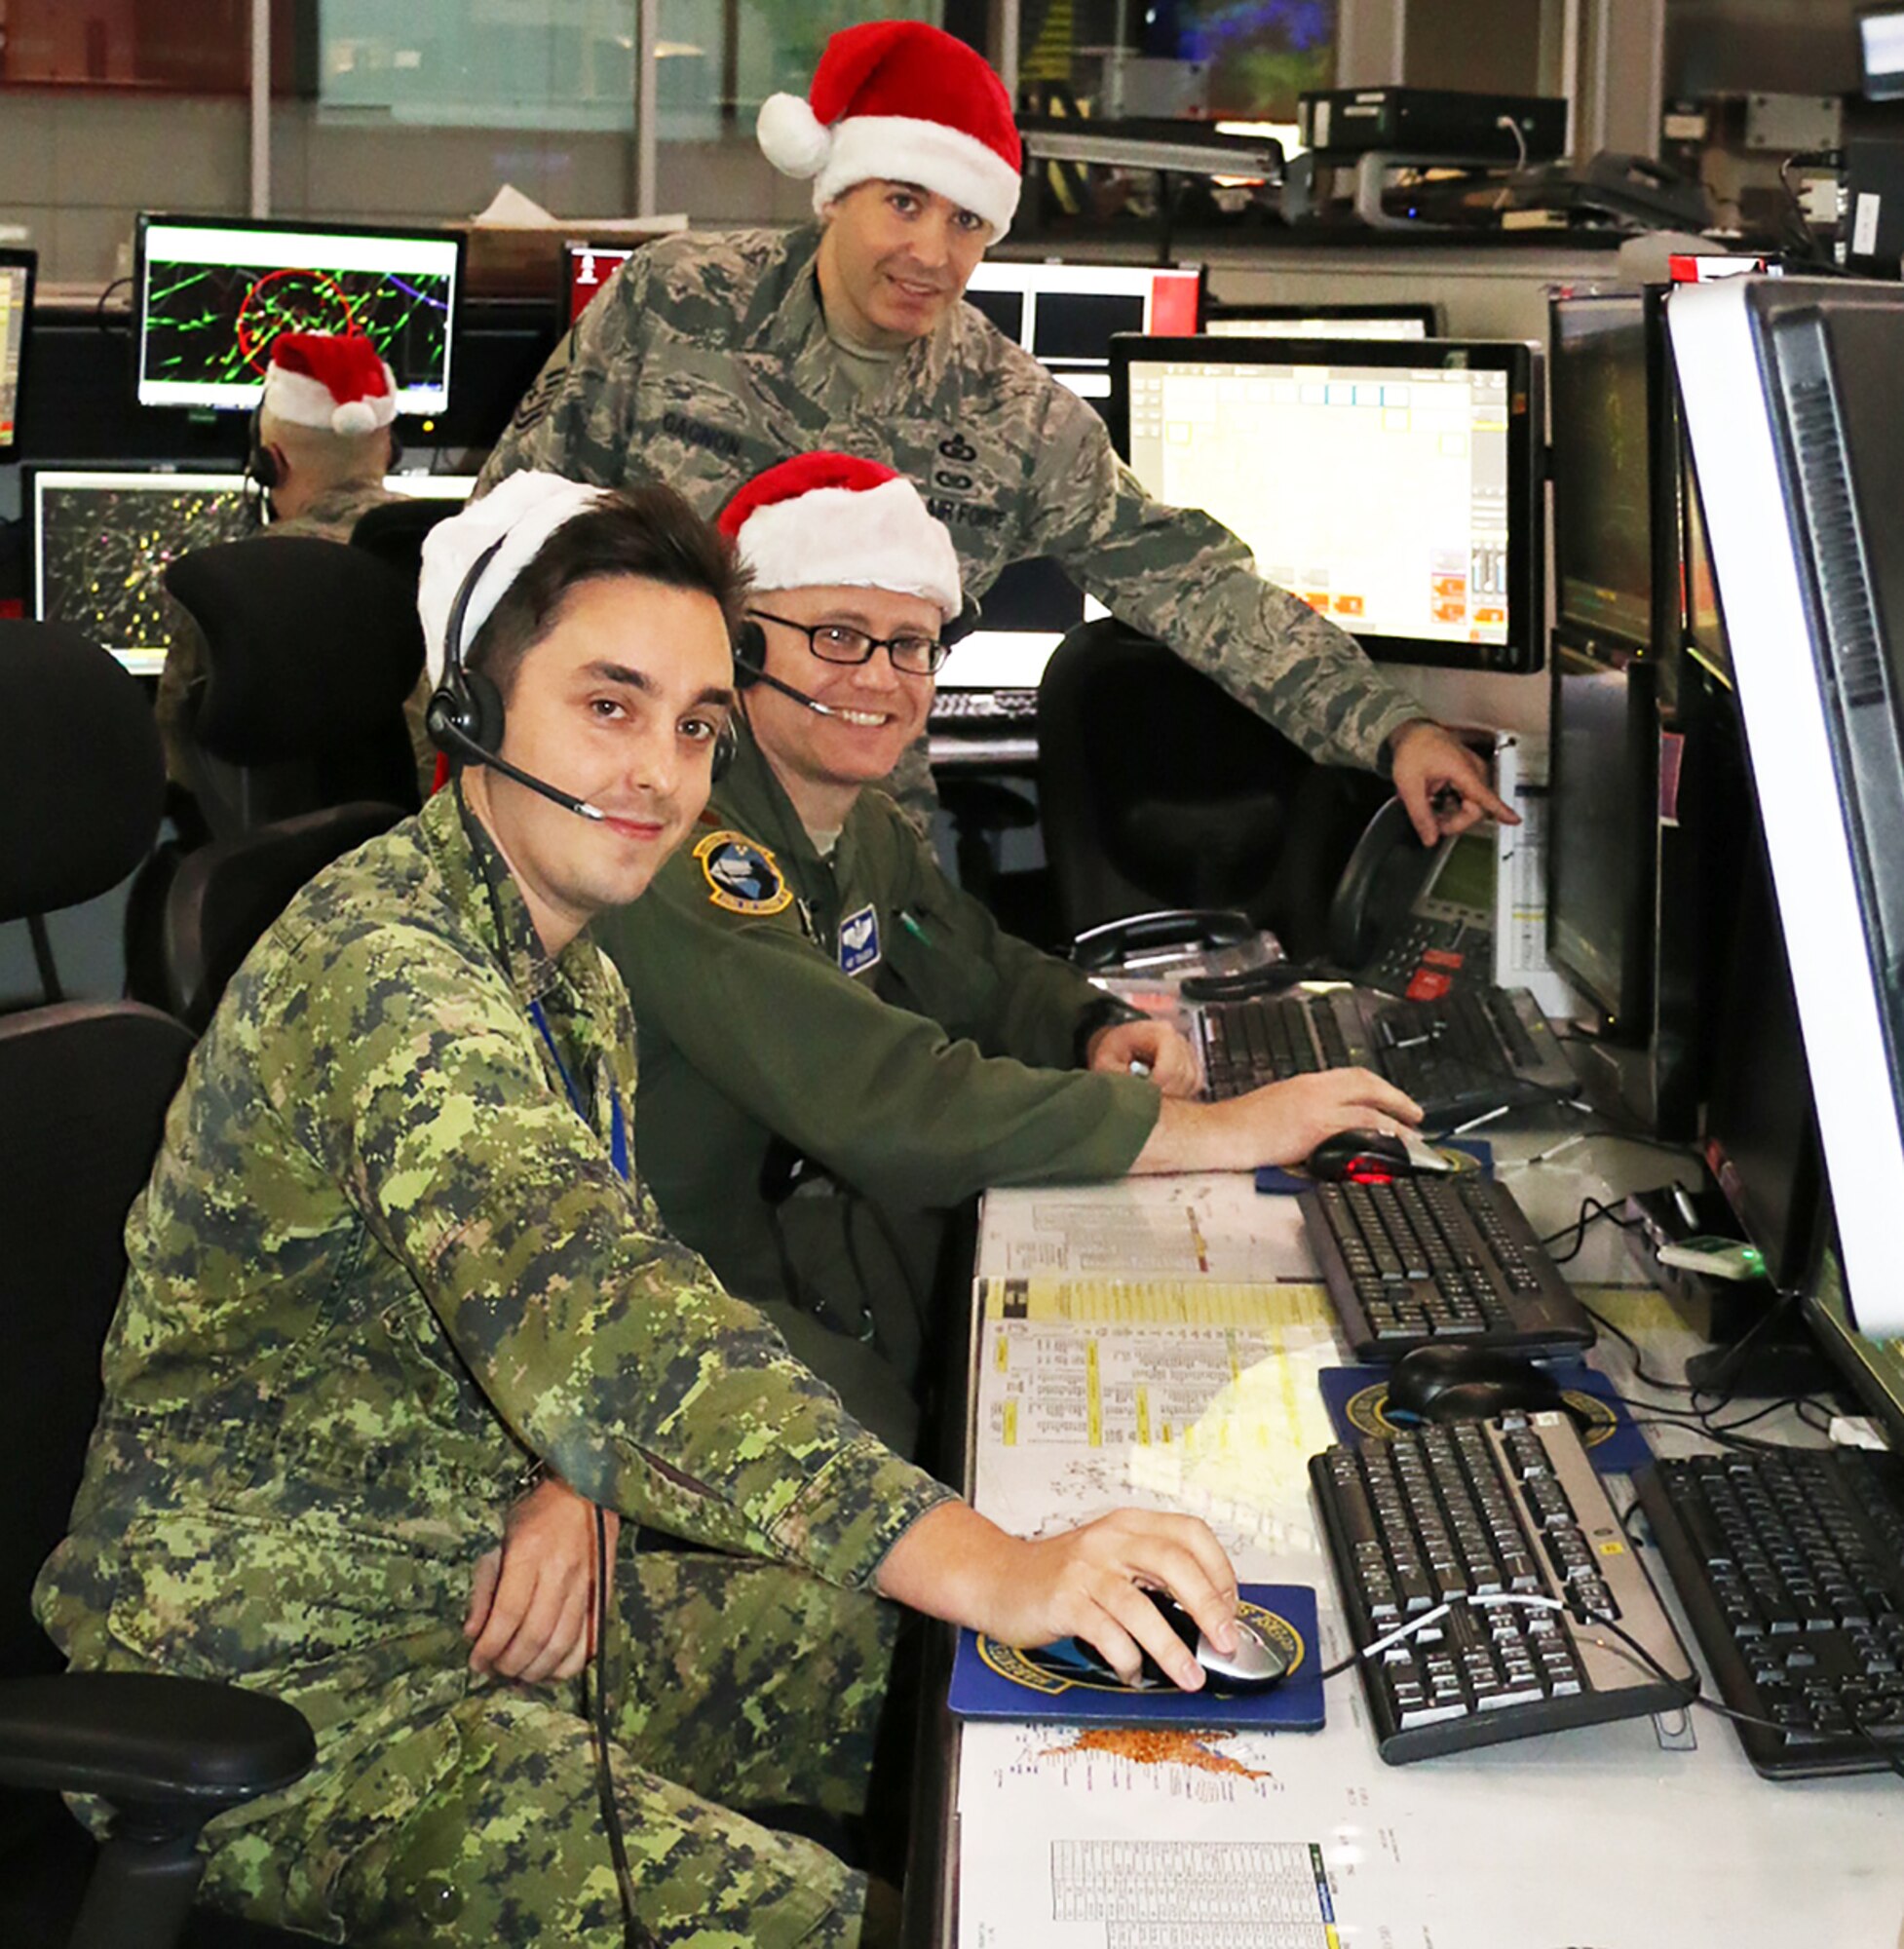 EADS Supports NORAD Santa Tracking